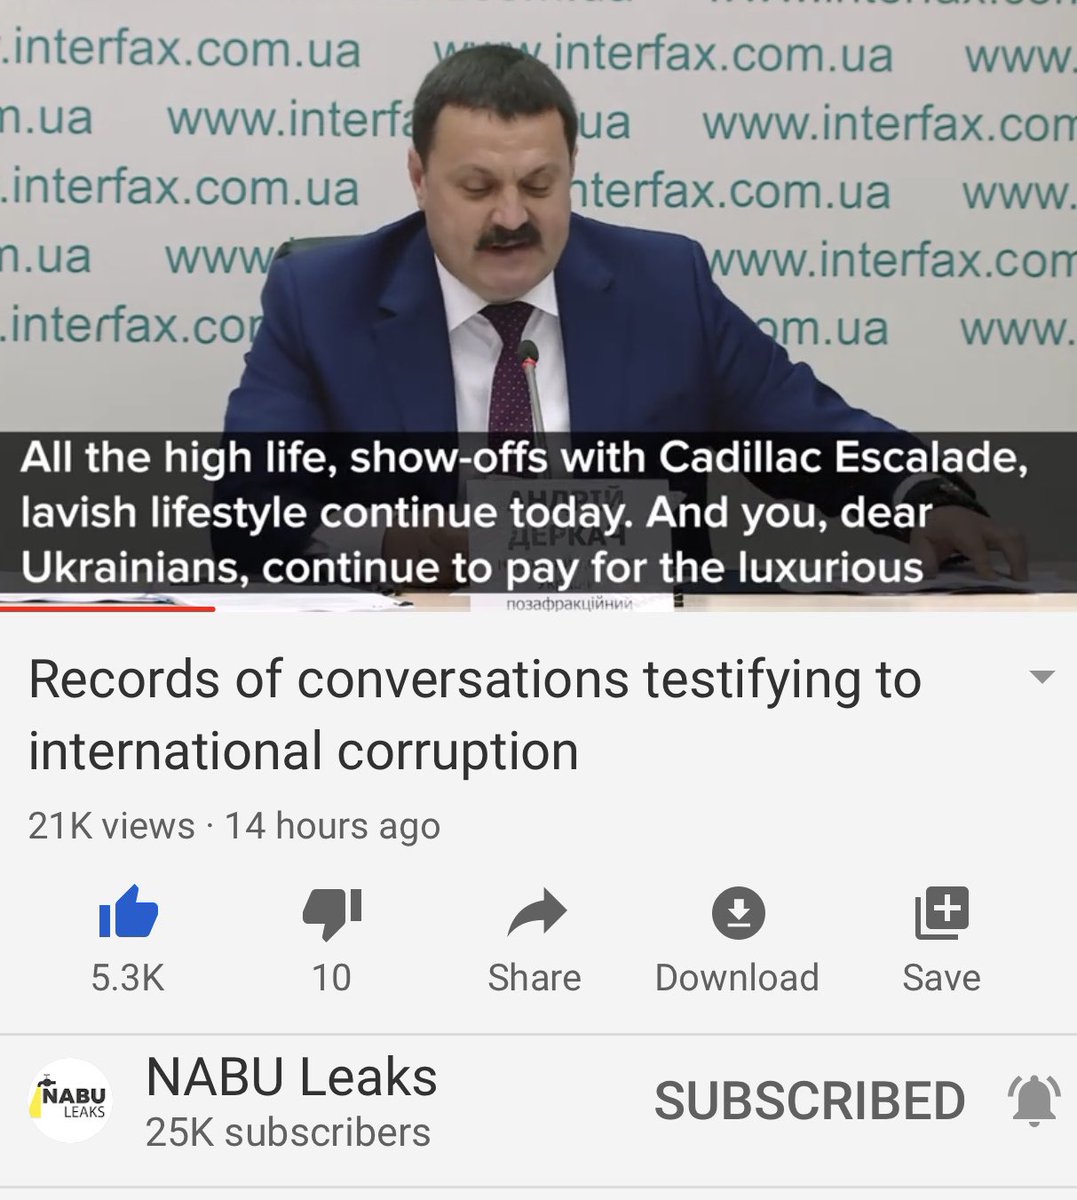 This next set discussed Kobolyev and his fat salary, driving around in a caddy, tariffing the crap out of the Ukrainian people, to pay for it all. Disgusting. Remember, he reports to Biden...